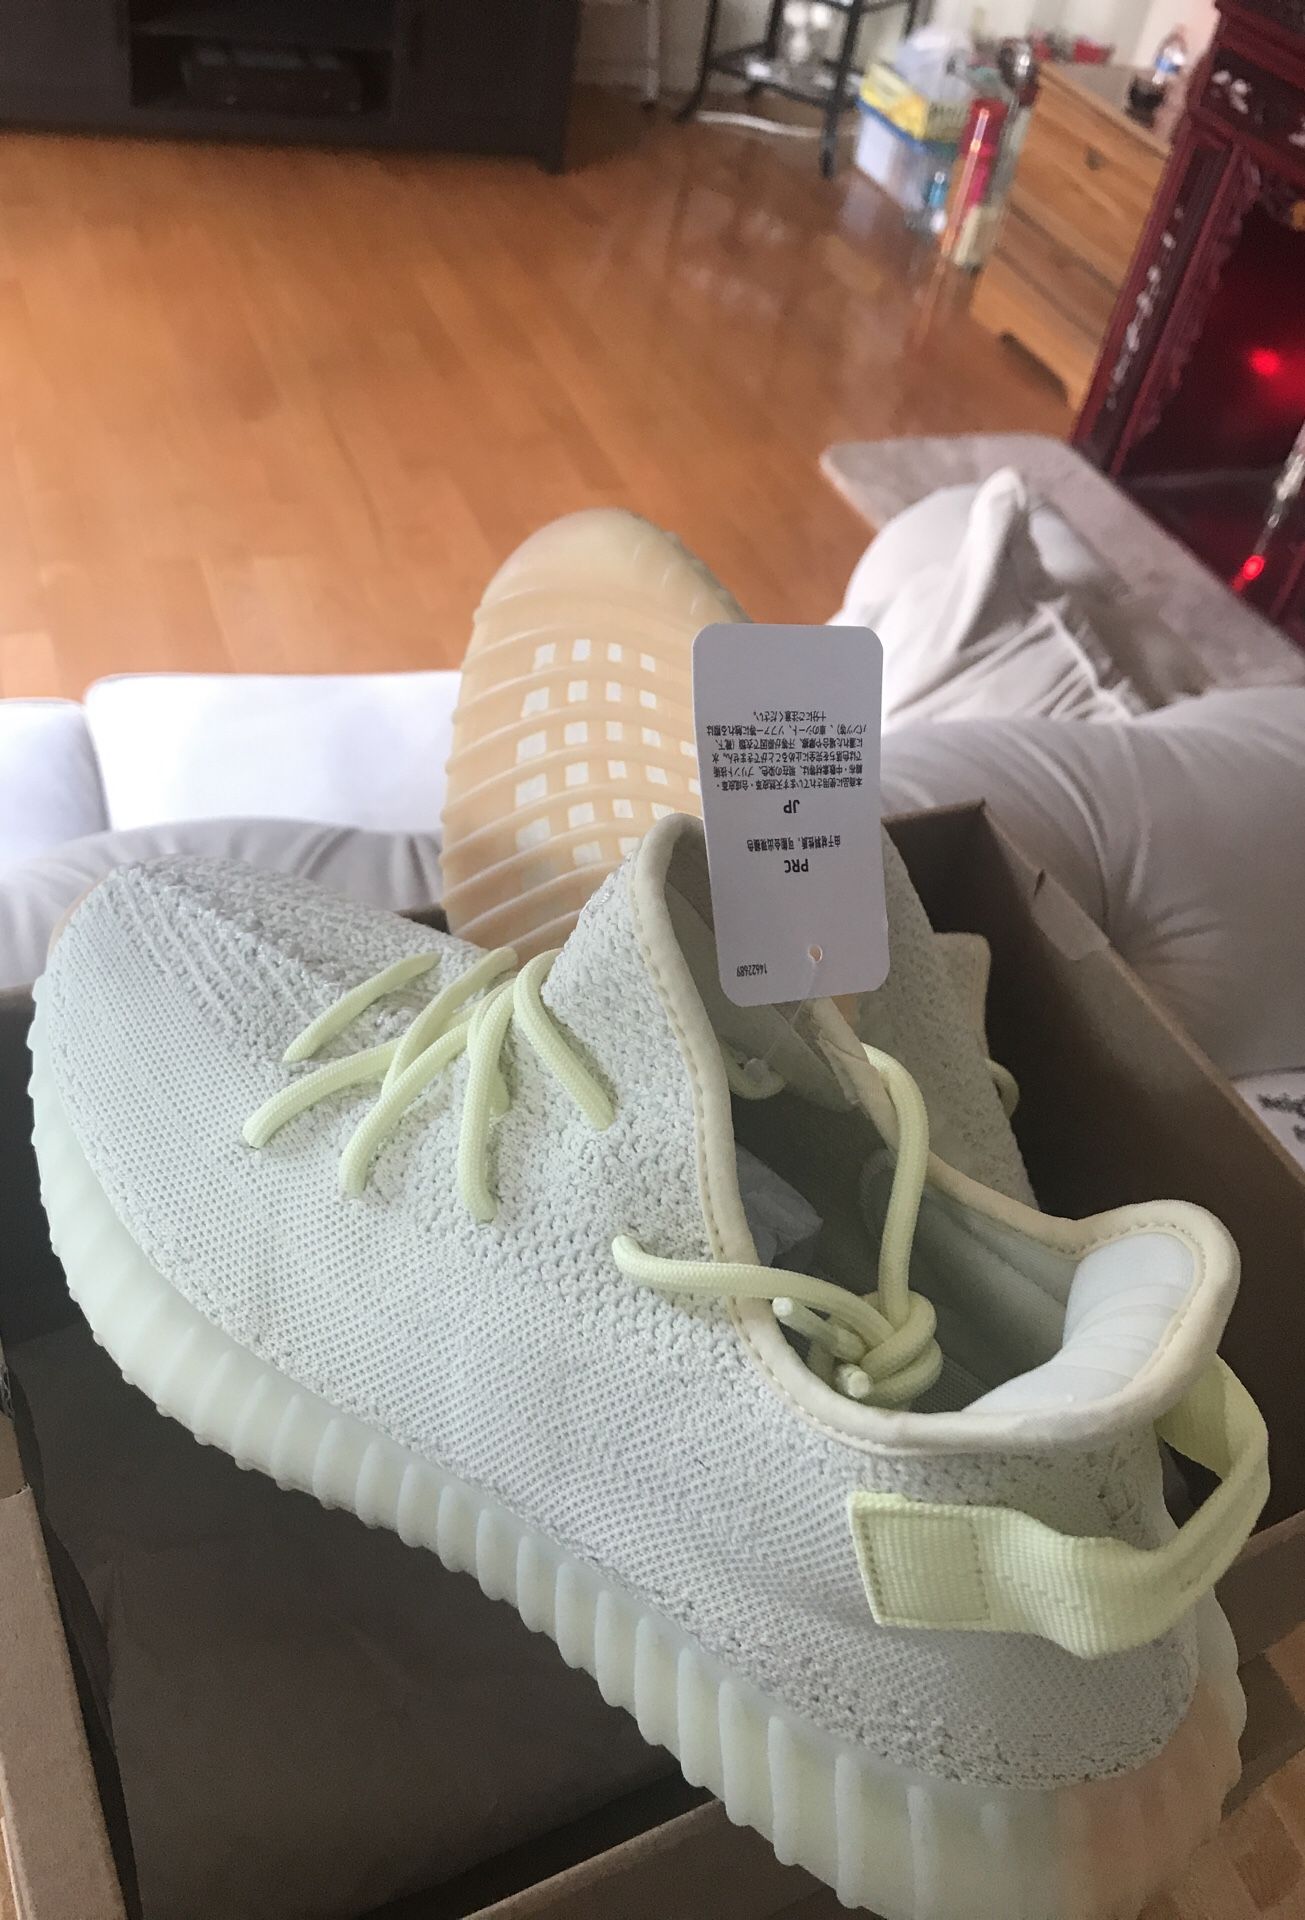 YEEZY 350 v2 Butters size 10.5